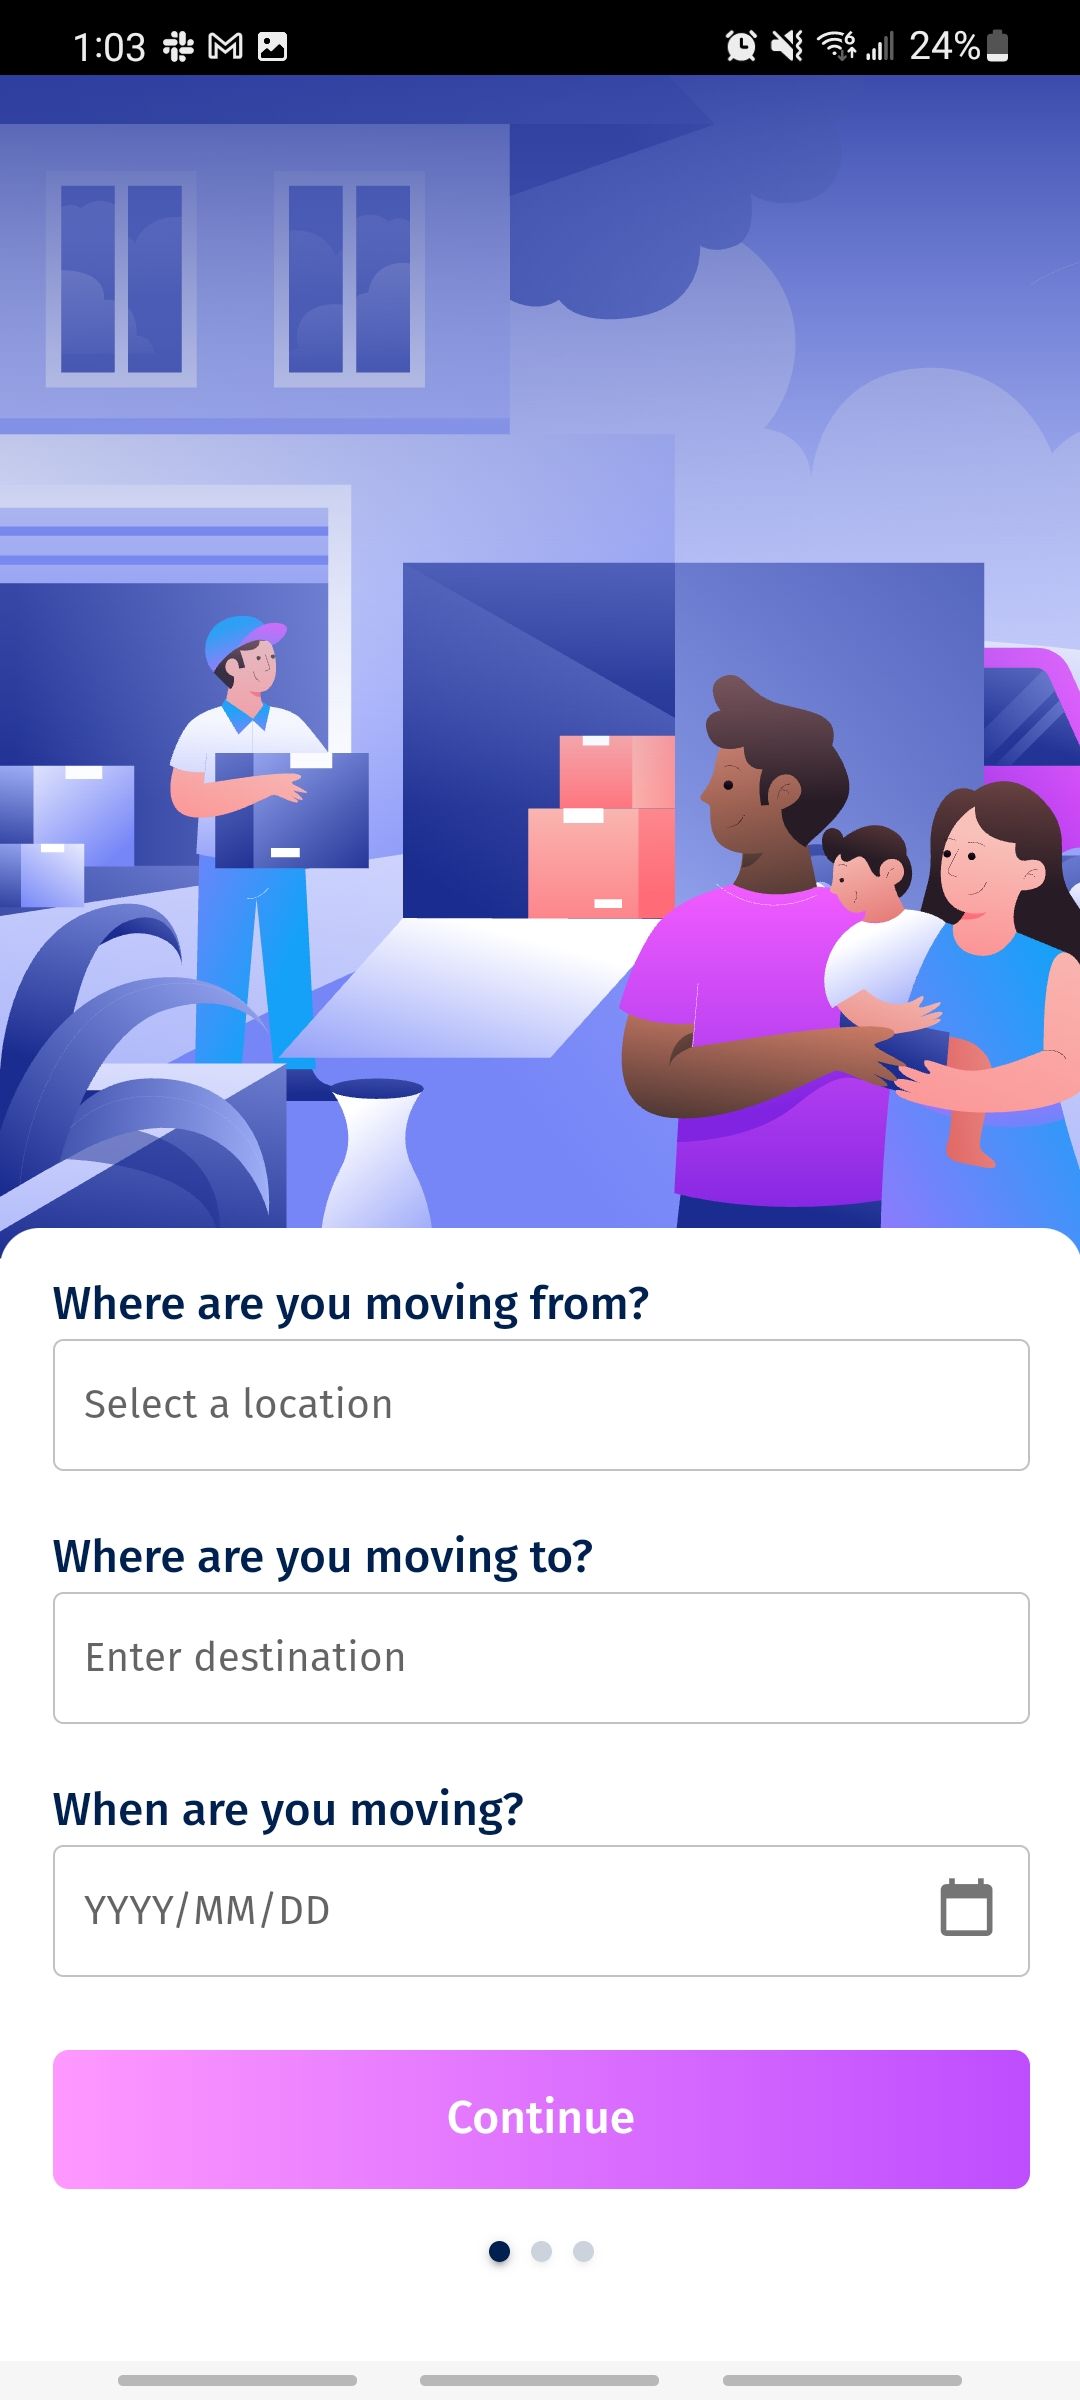 avvinue app asking where you're moving from and to, and when